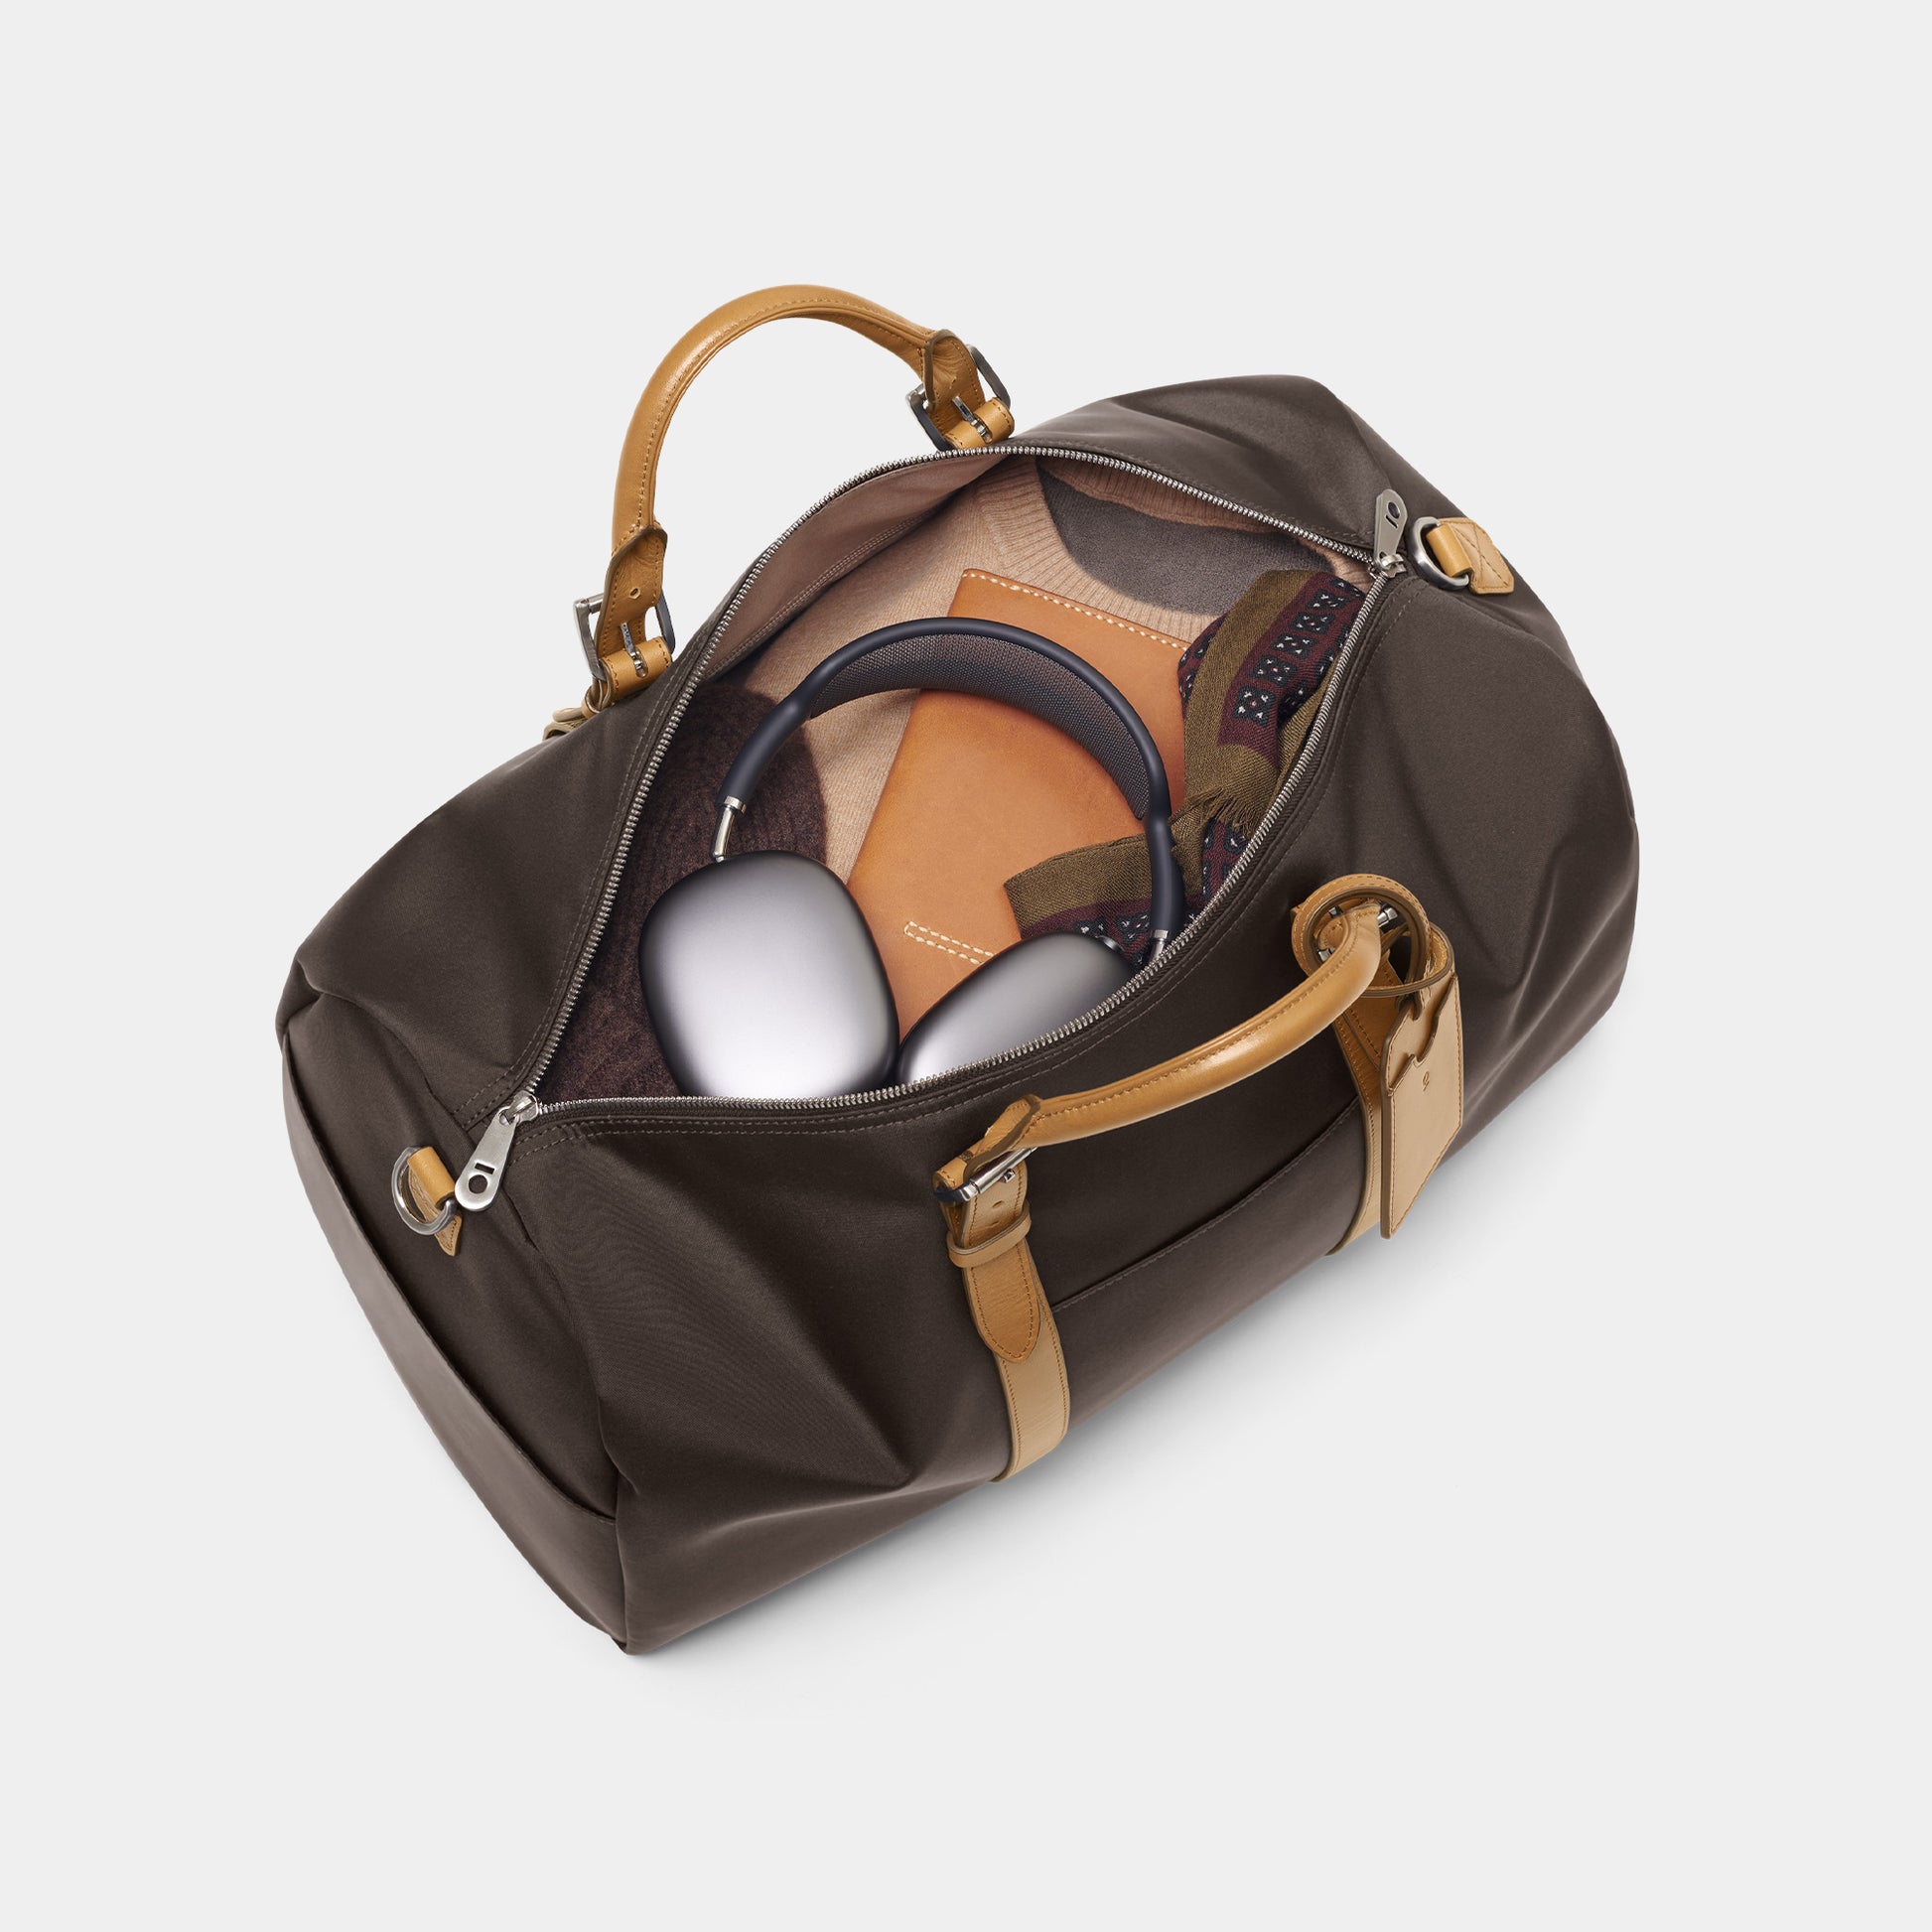 Louis Vuitton Bag With Pockets Portugal, SAVE 51% 